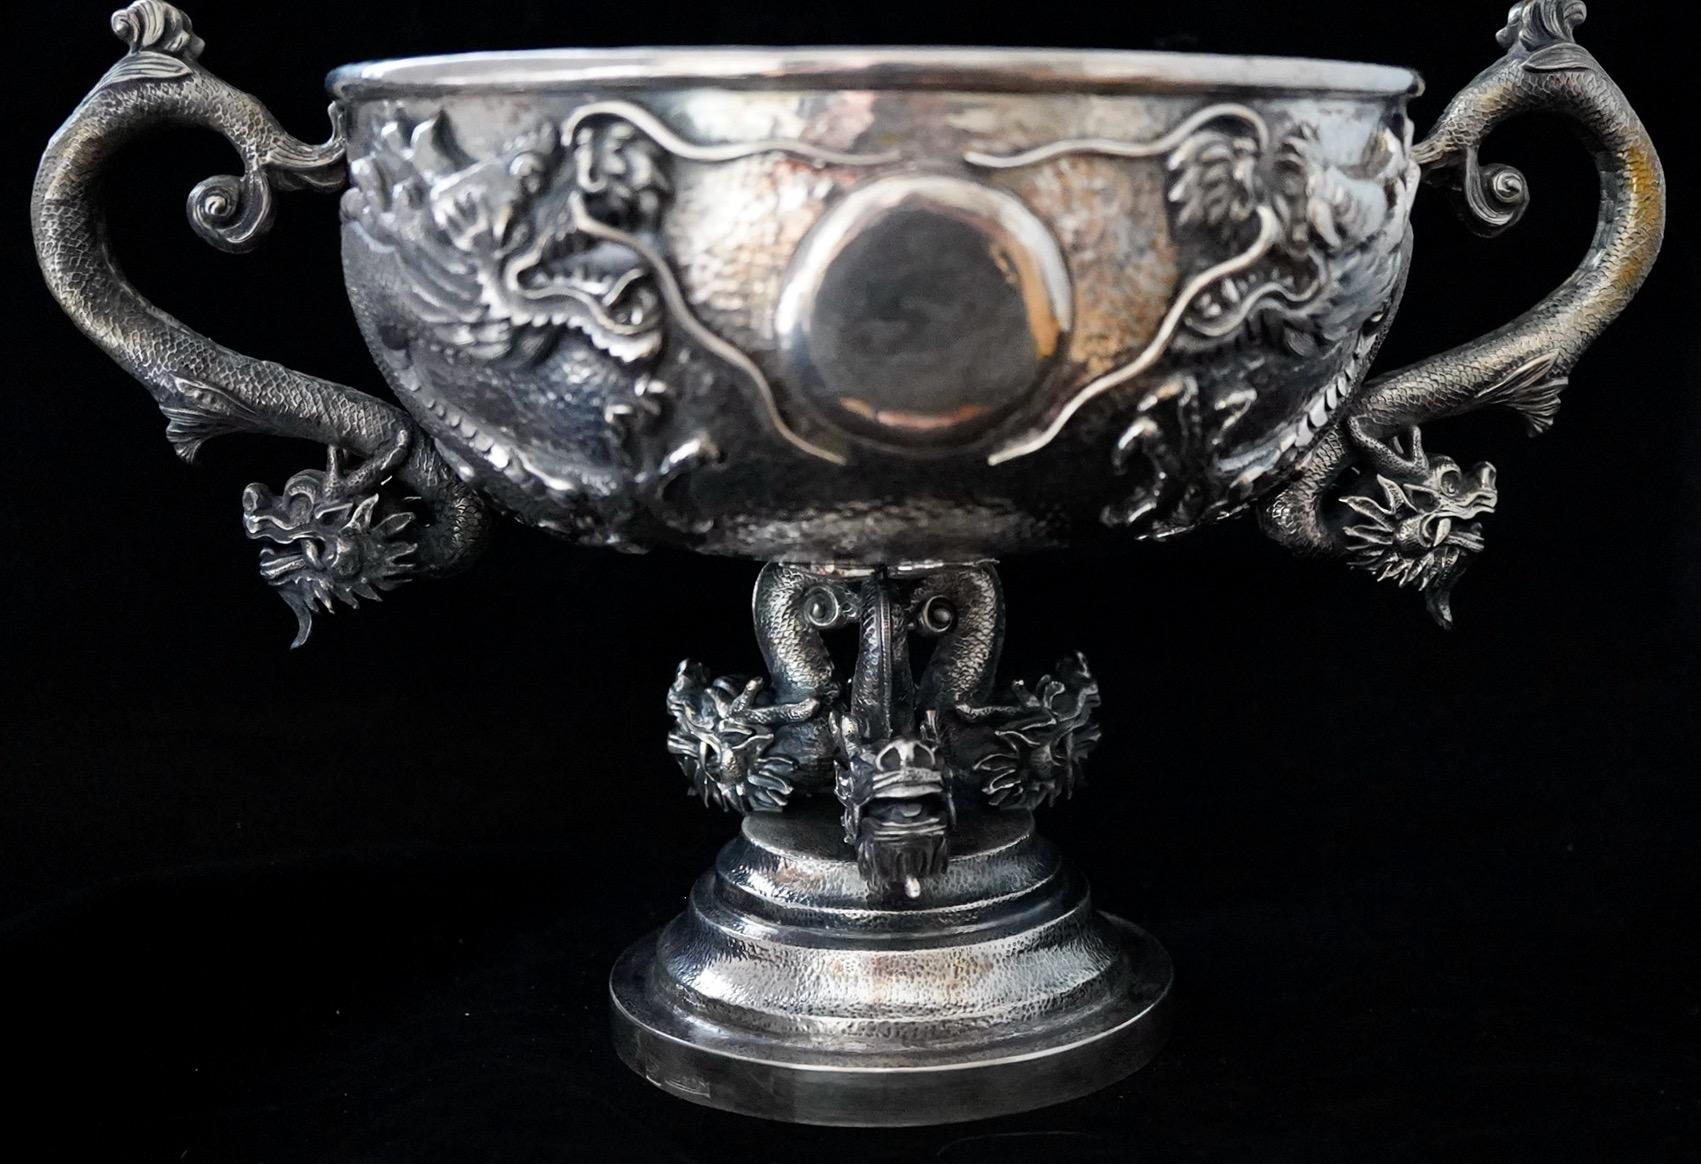 Chinese Export Silver Centerpiece with dragon decoration. The centerpiece bowl has two repousse dragons with attached dragon handles. The bowl rests on three cast dragons. The centerpiece is 12.5 inches handle to handle, 7.75 inches tall, and